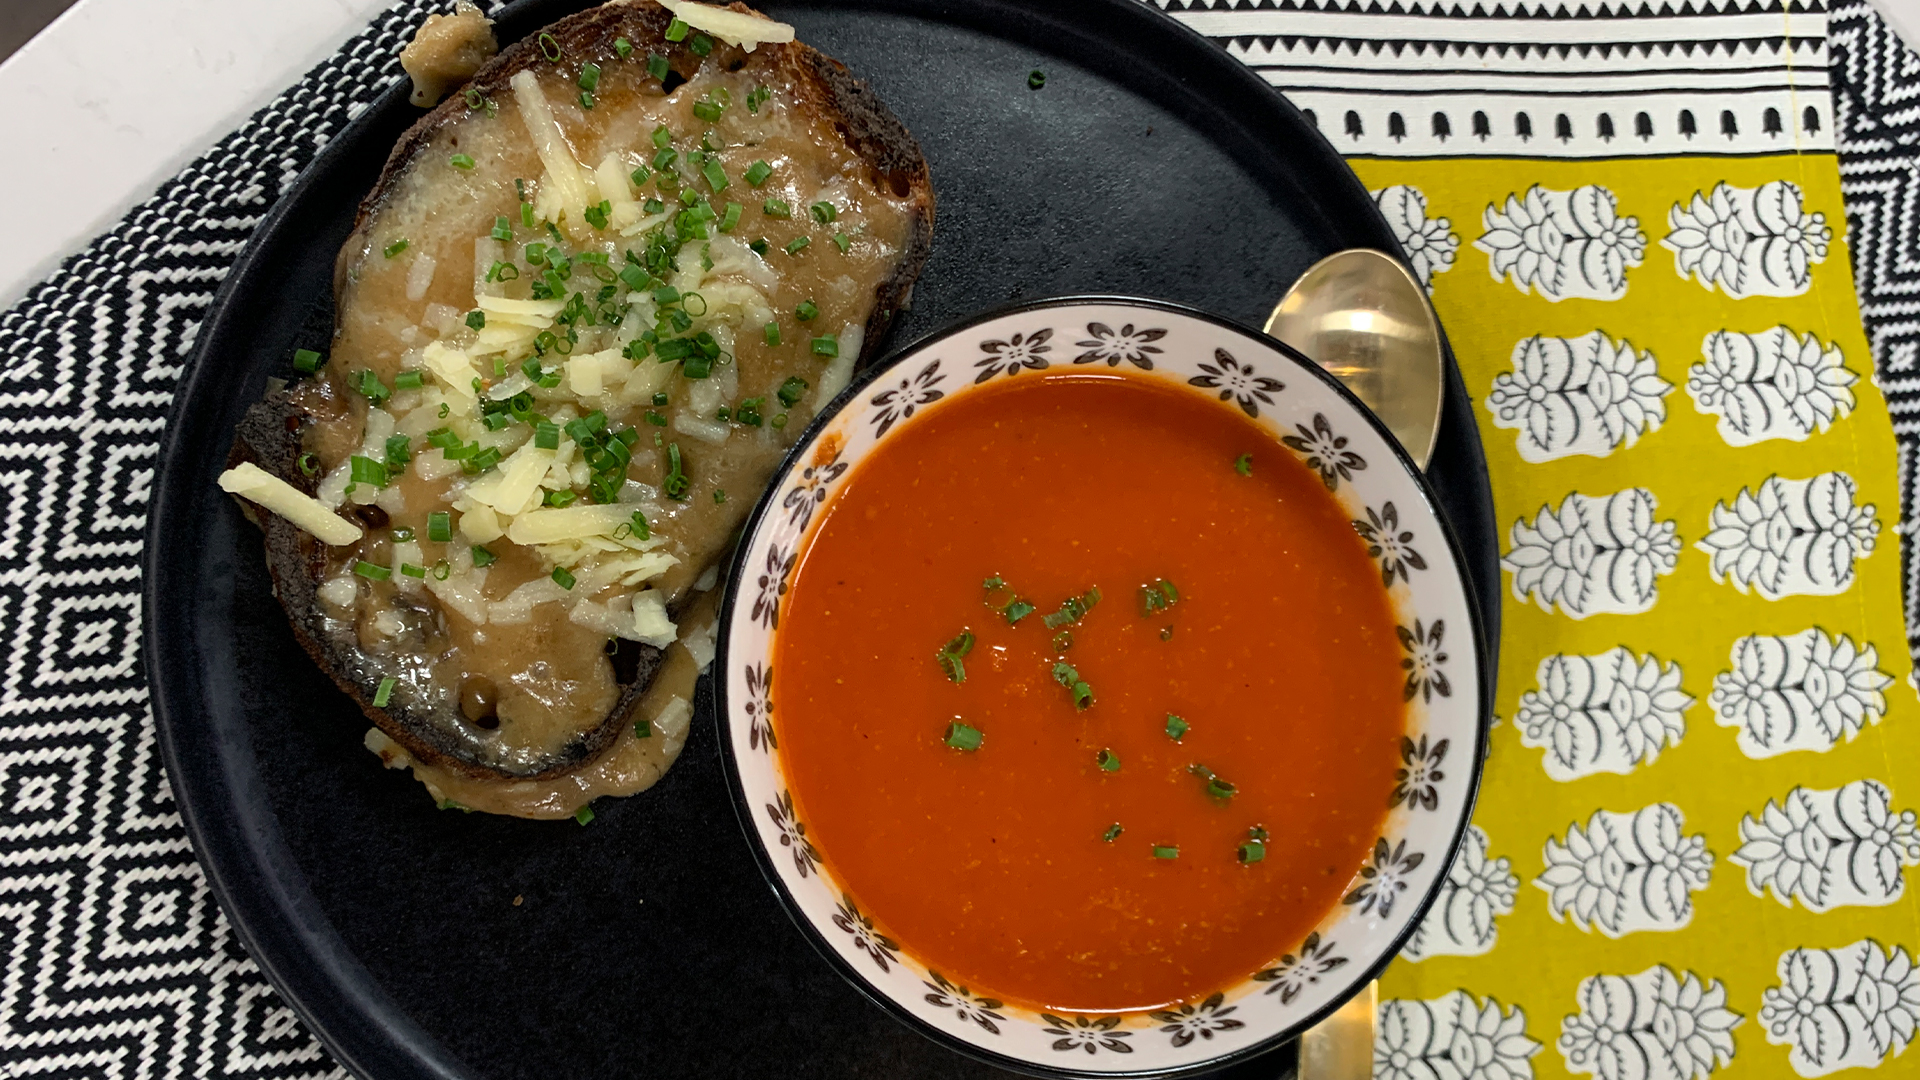 Roasted red pepper and tomato soup with Welsh rarebit